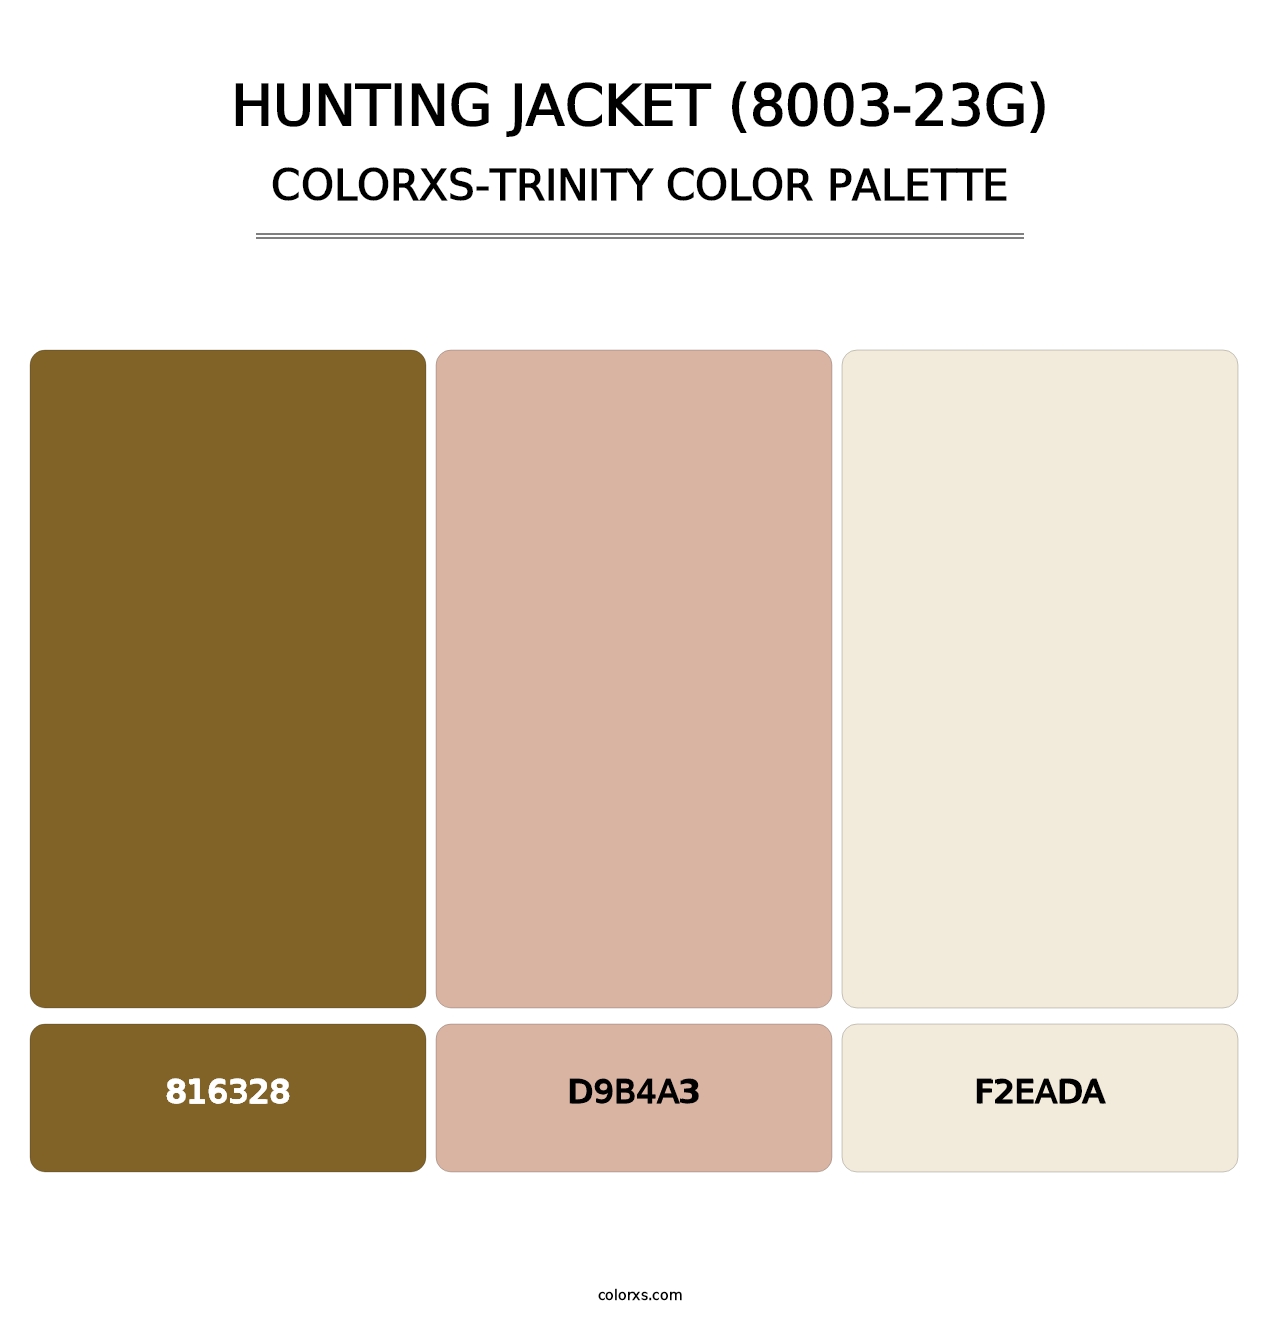 Hunting Jacket (8003-23G) - Colorxs Trinity Palette